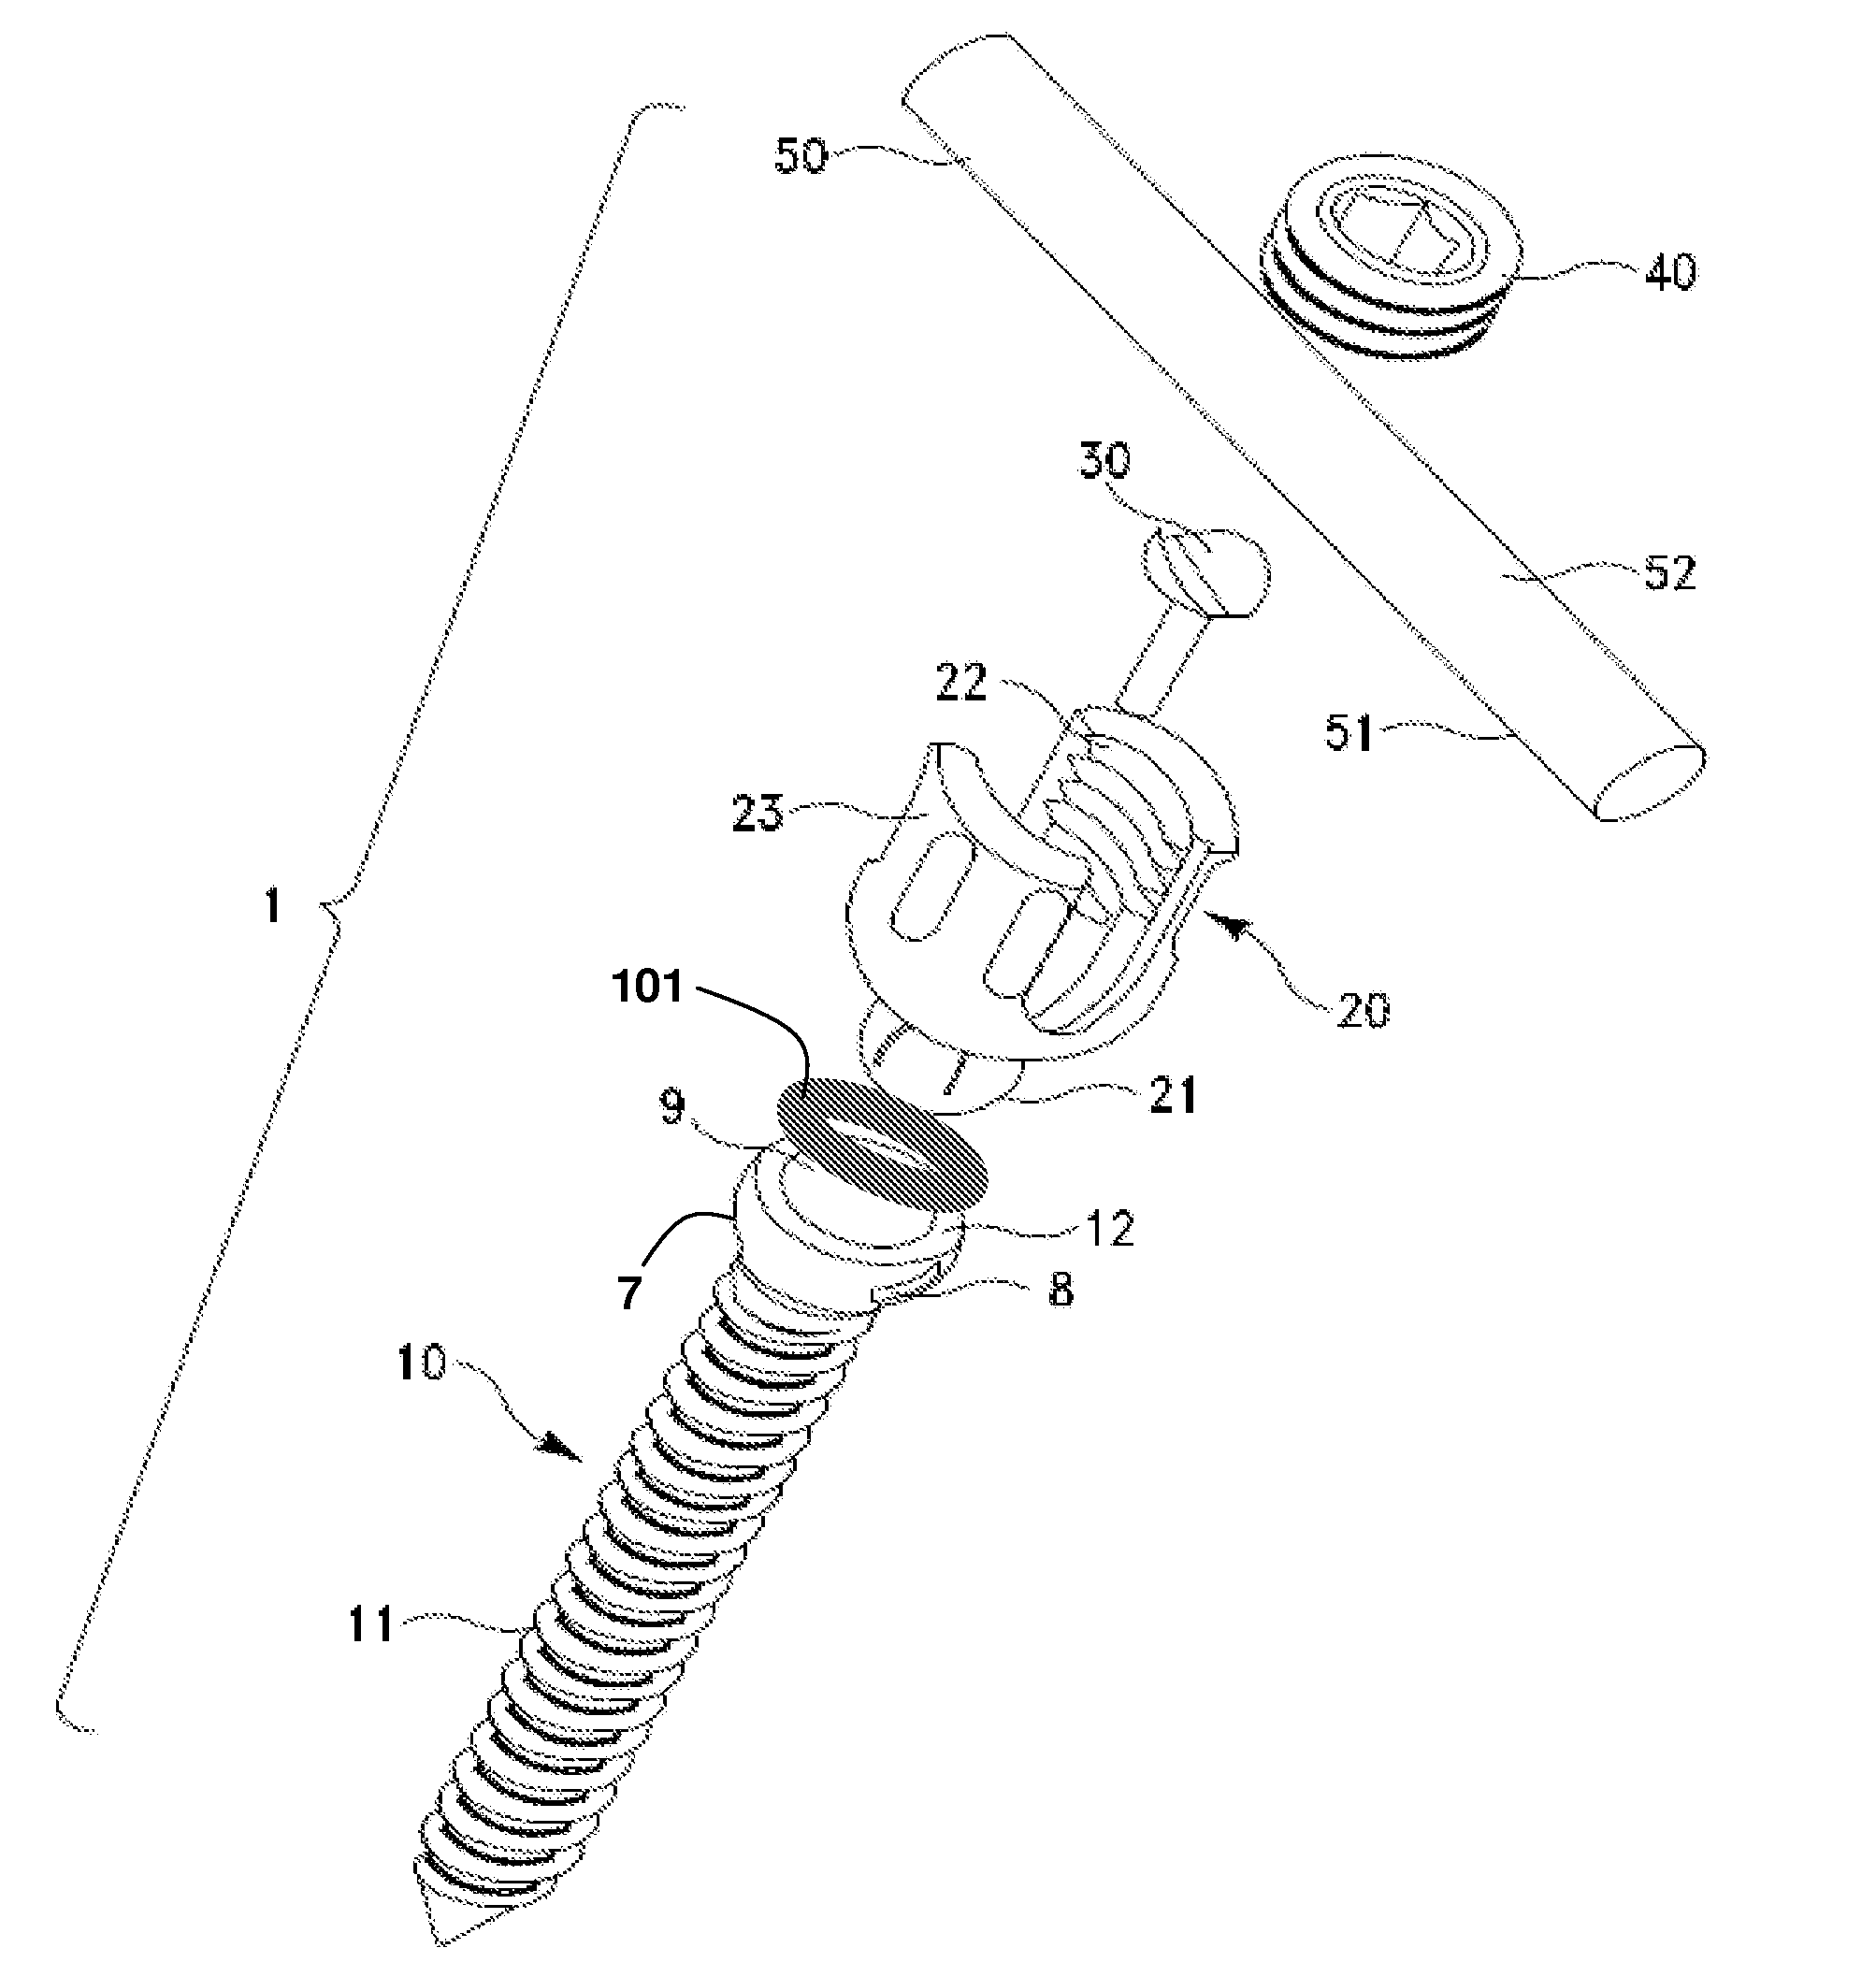 Spring-loaded, load sharing polyaxial pedicle screw assembly and method